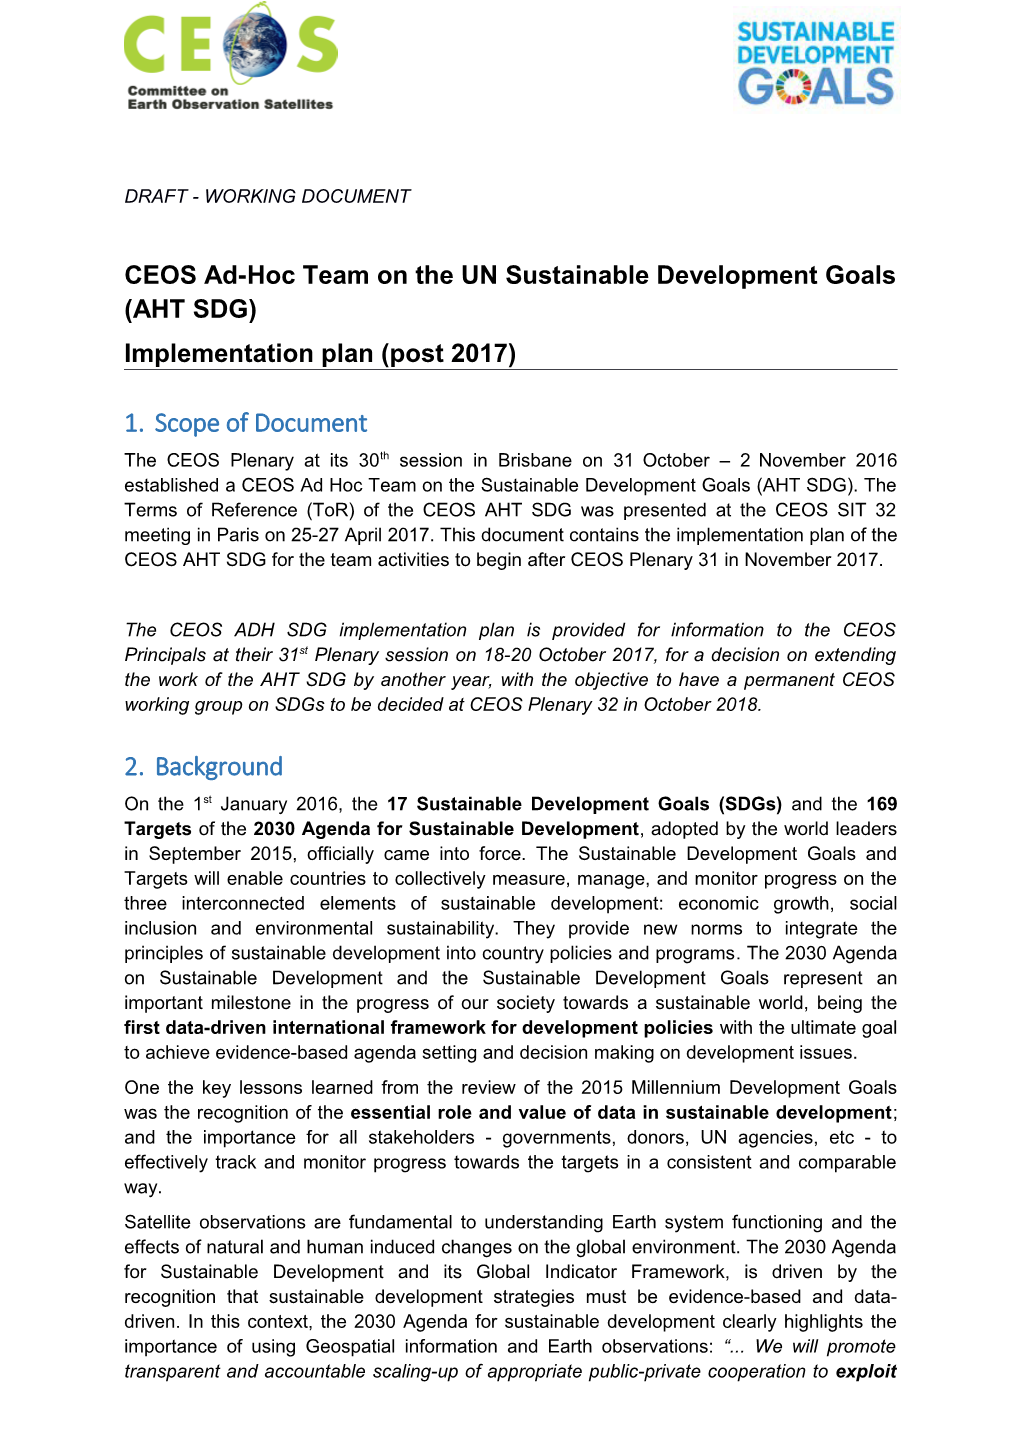 CEOS AHT SDG Implementation Plan (Including Terms of Reference)